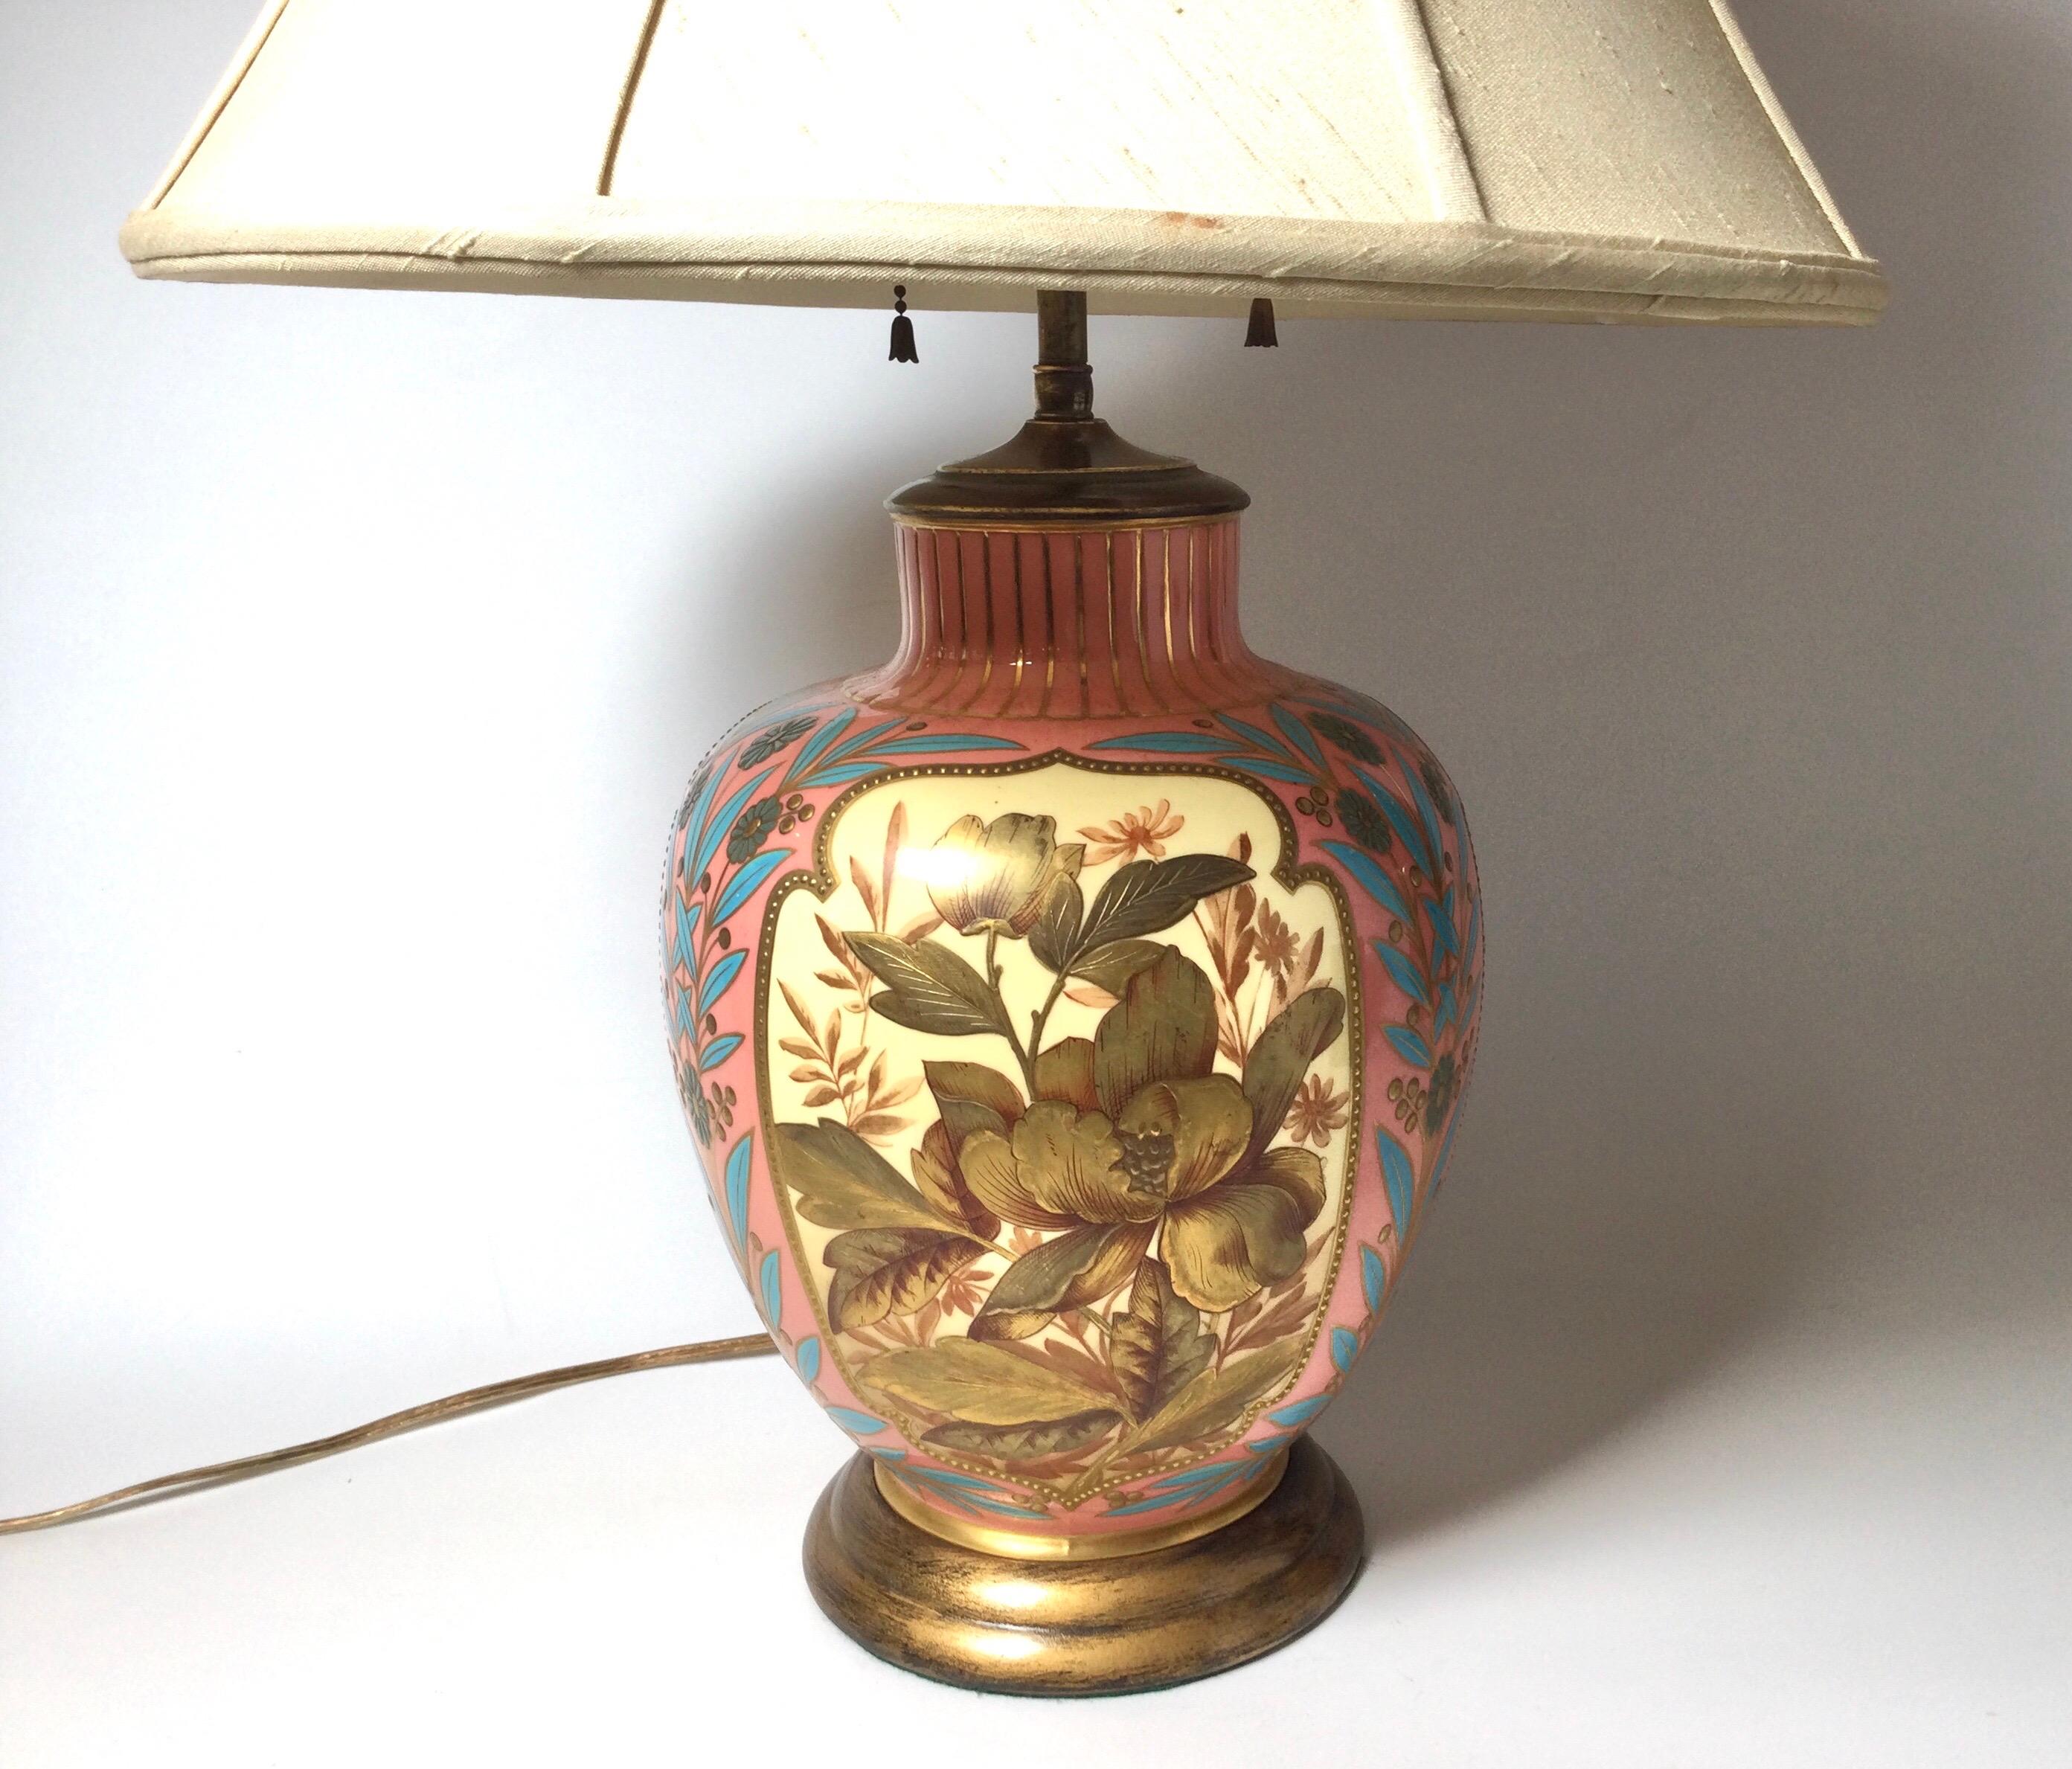 Magnificent hand gilt and enameled porcelain vase by Royal Worcester, circa 1870-80. The raised gilt and decorated surface with a coral background with gilt bronze and gold tones with pops of vibrant colors. The antiqued brass mounts with two